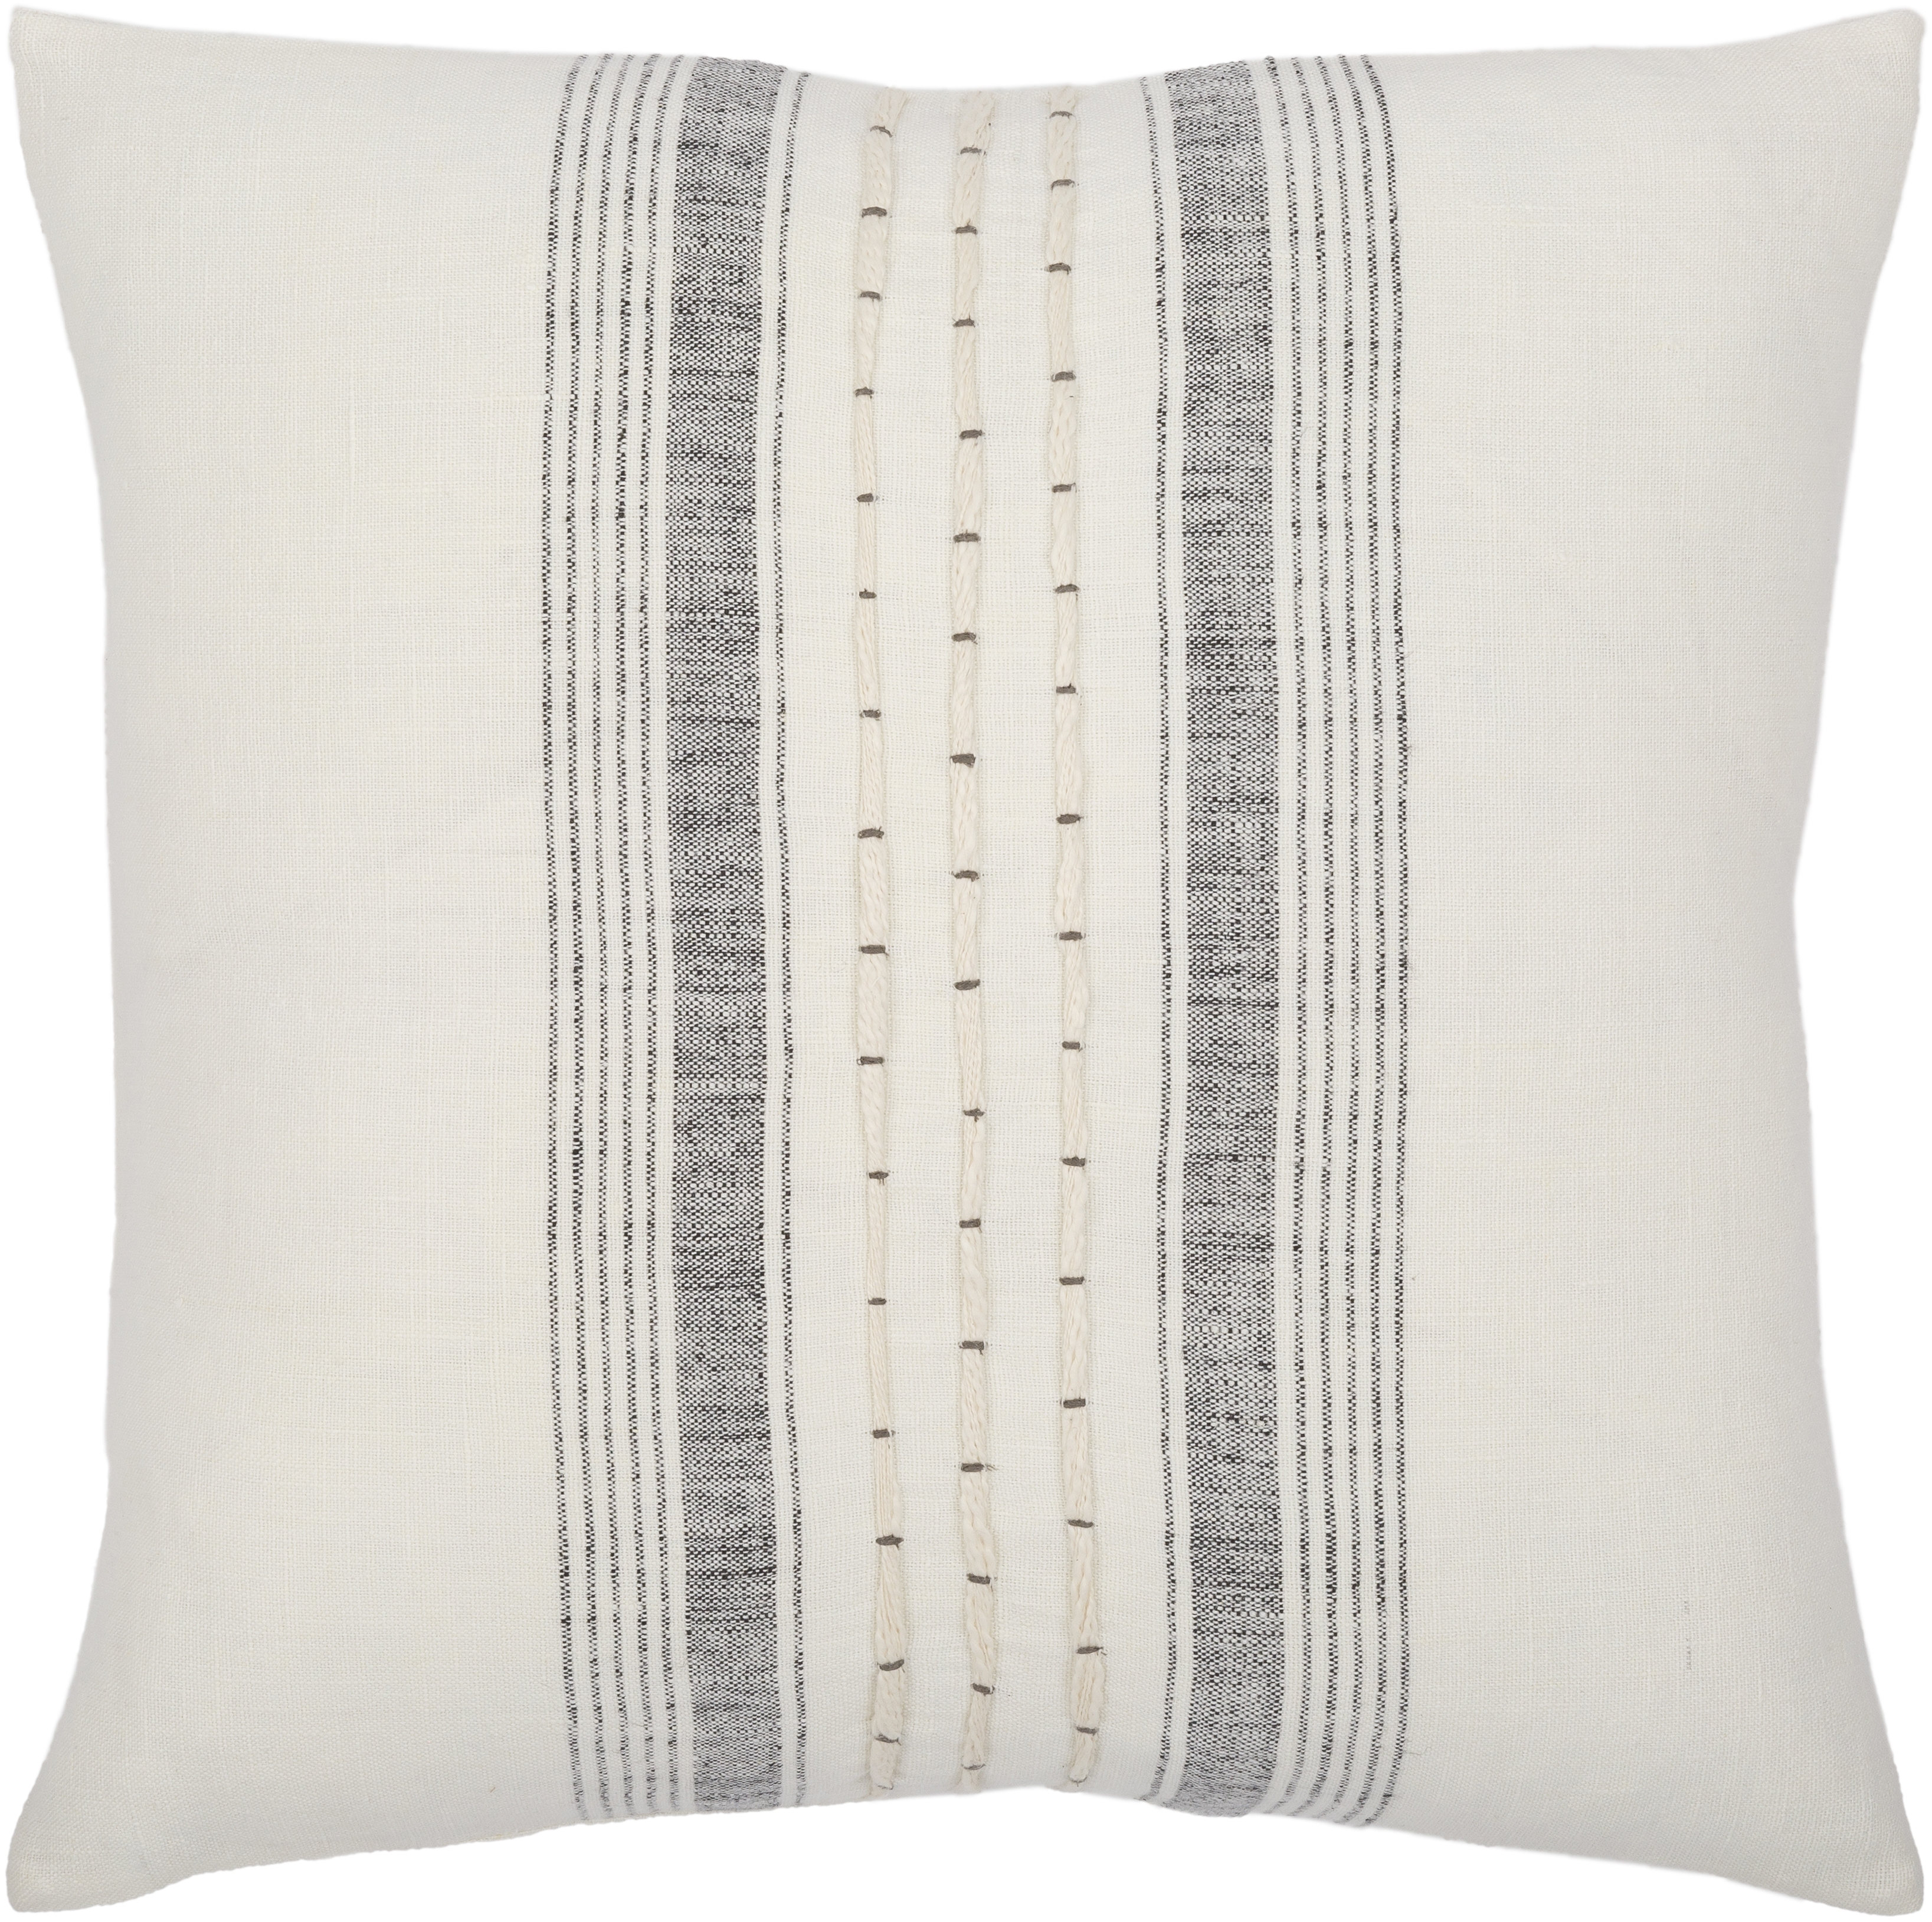 Linen Stripe Embellished Throw Pillow, 20" x 20", with poly insert - Image 0